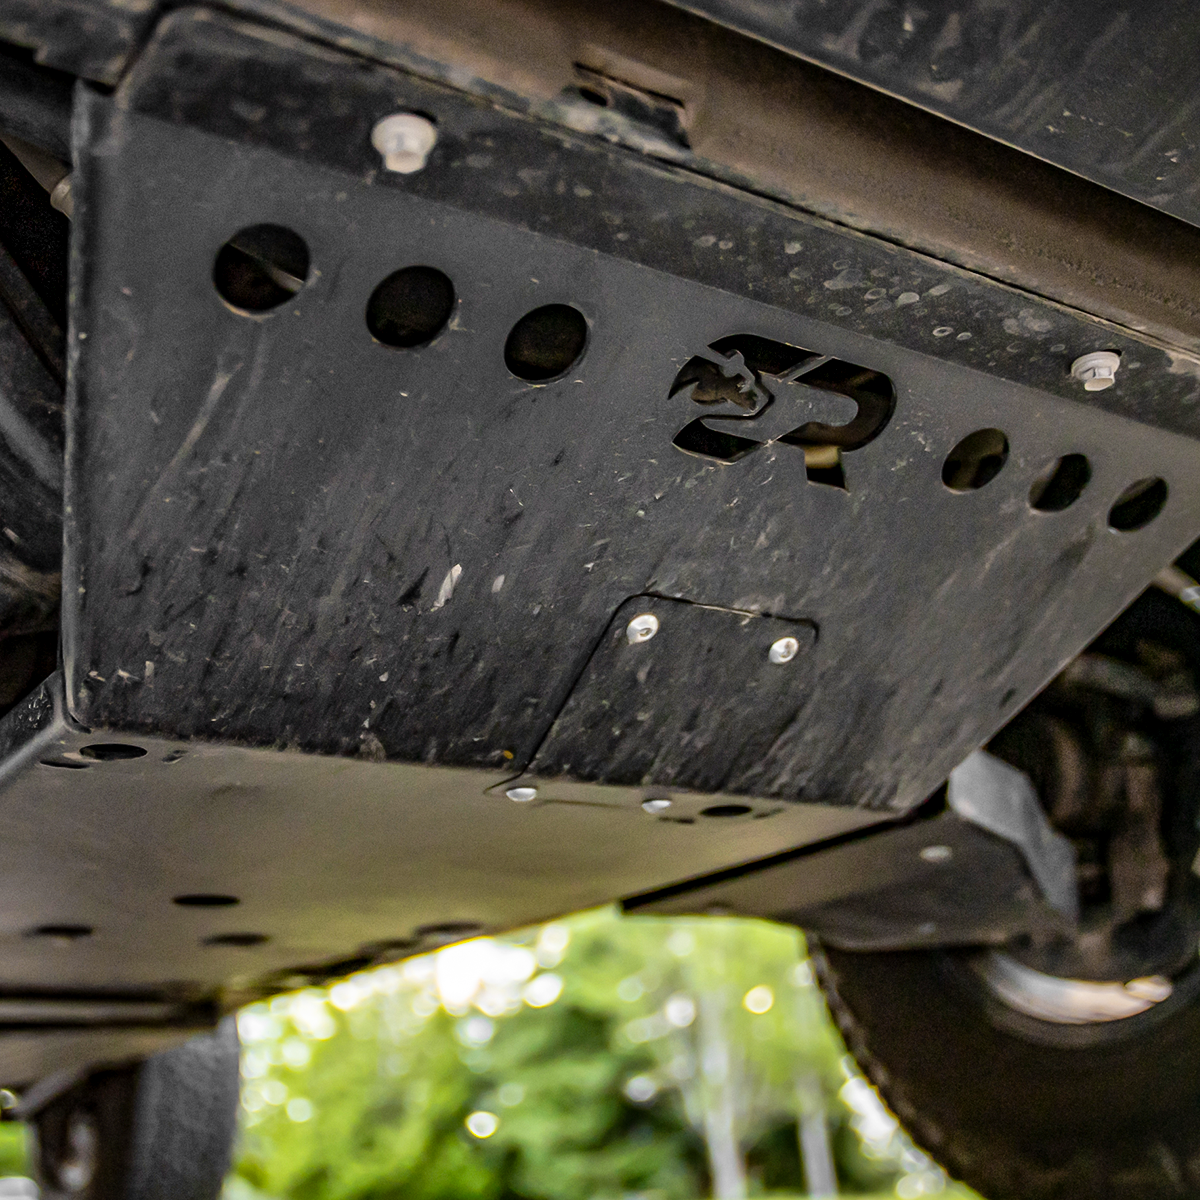 Complete Skid Plate Collection For 2014-2024 4Runner